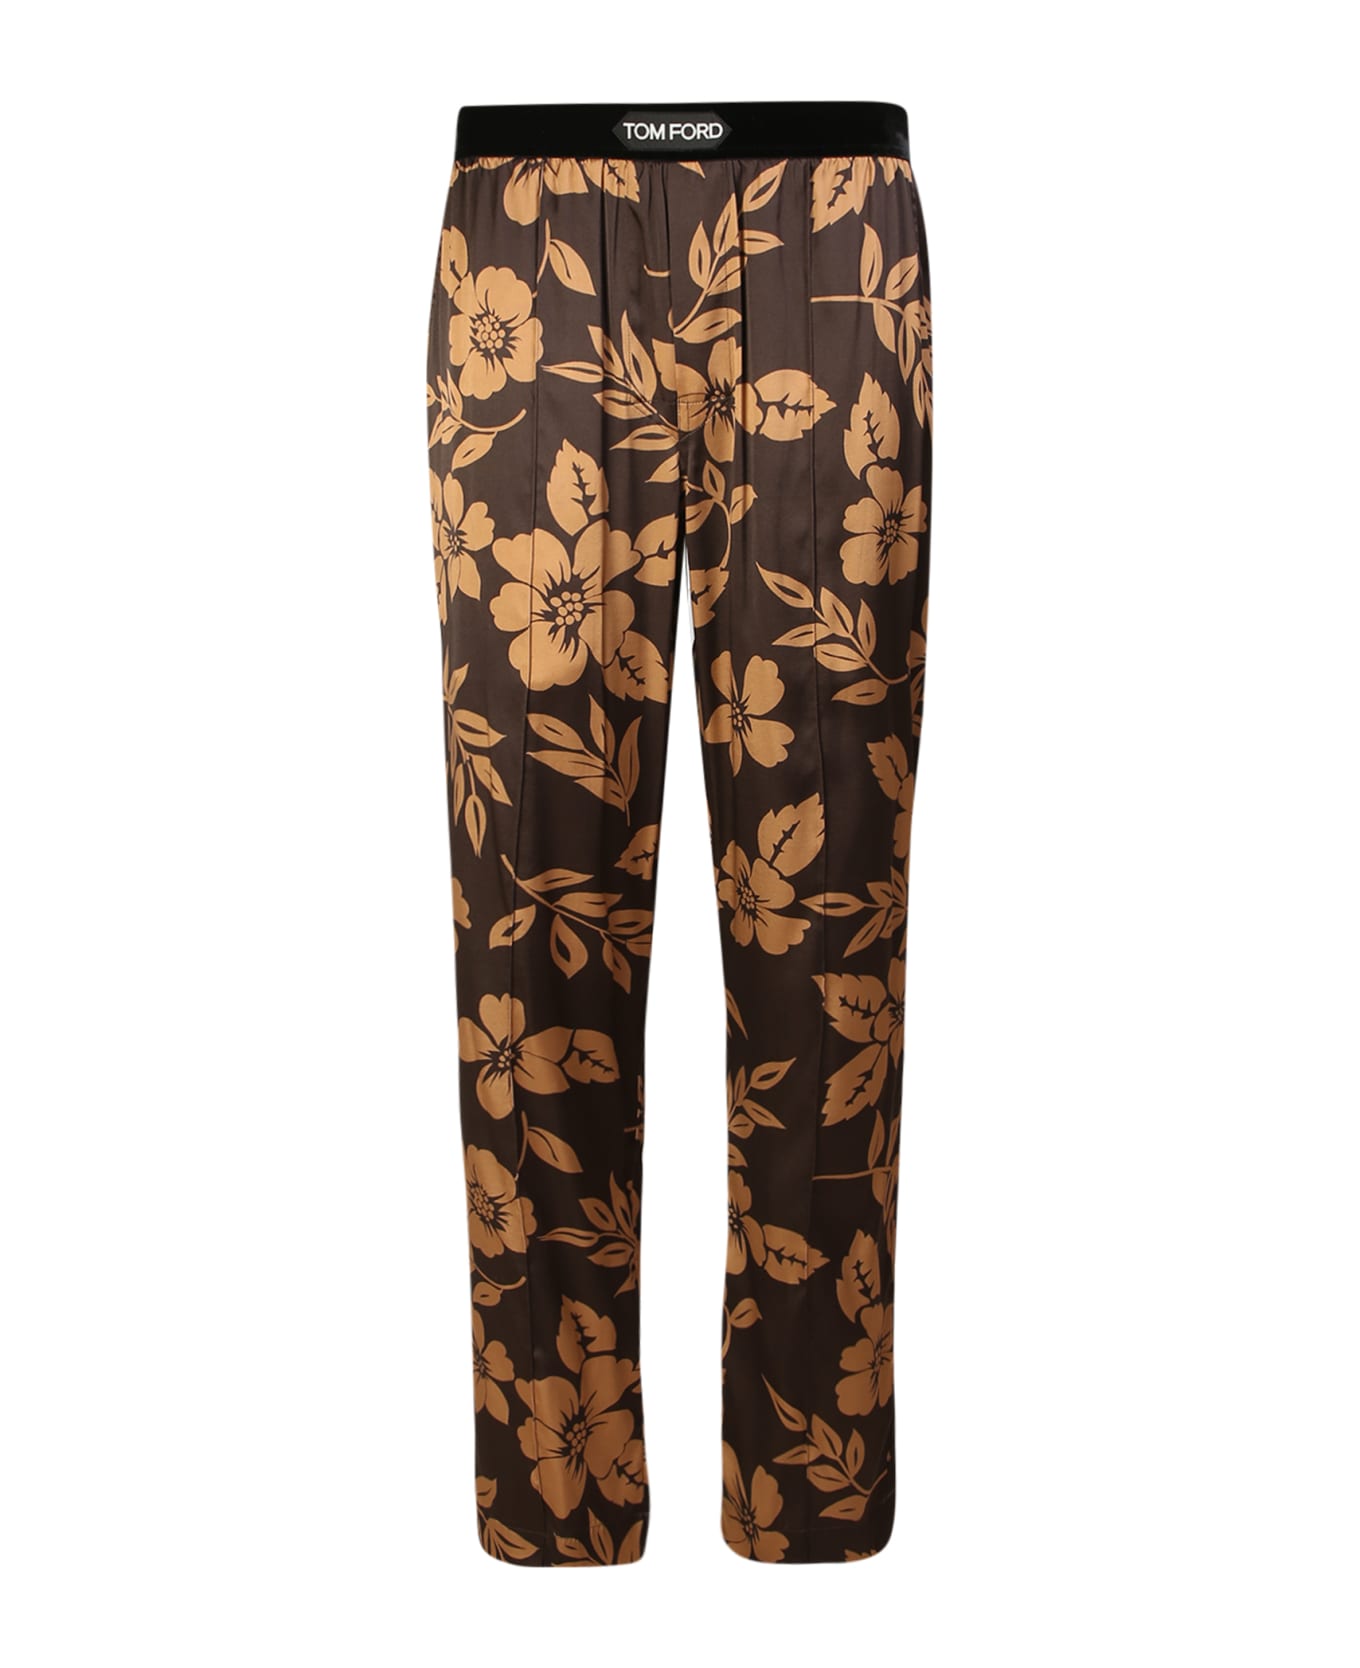 Tom Ford Multicolor Flower Trousers - Brown